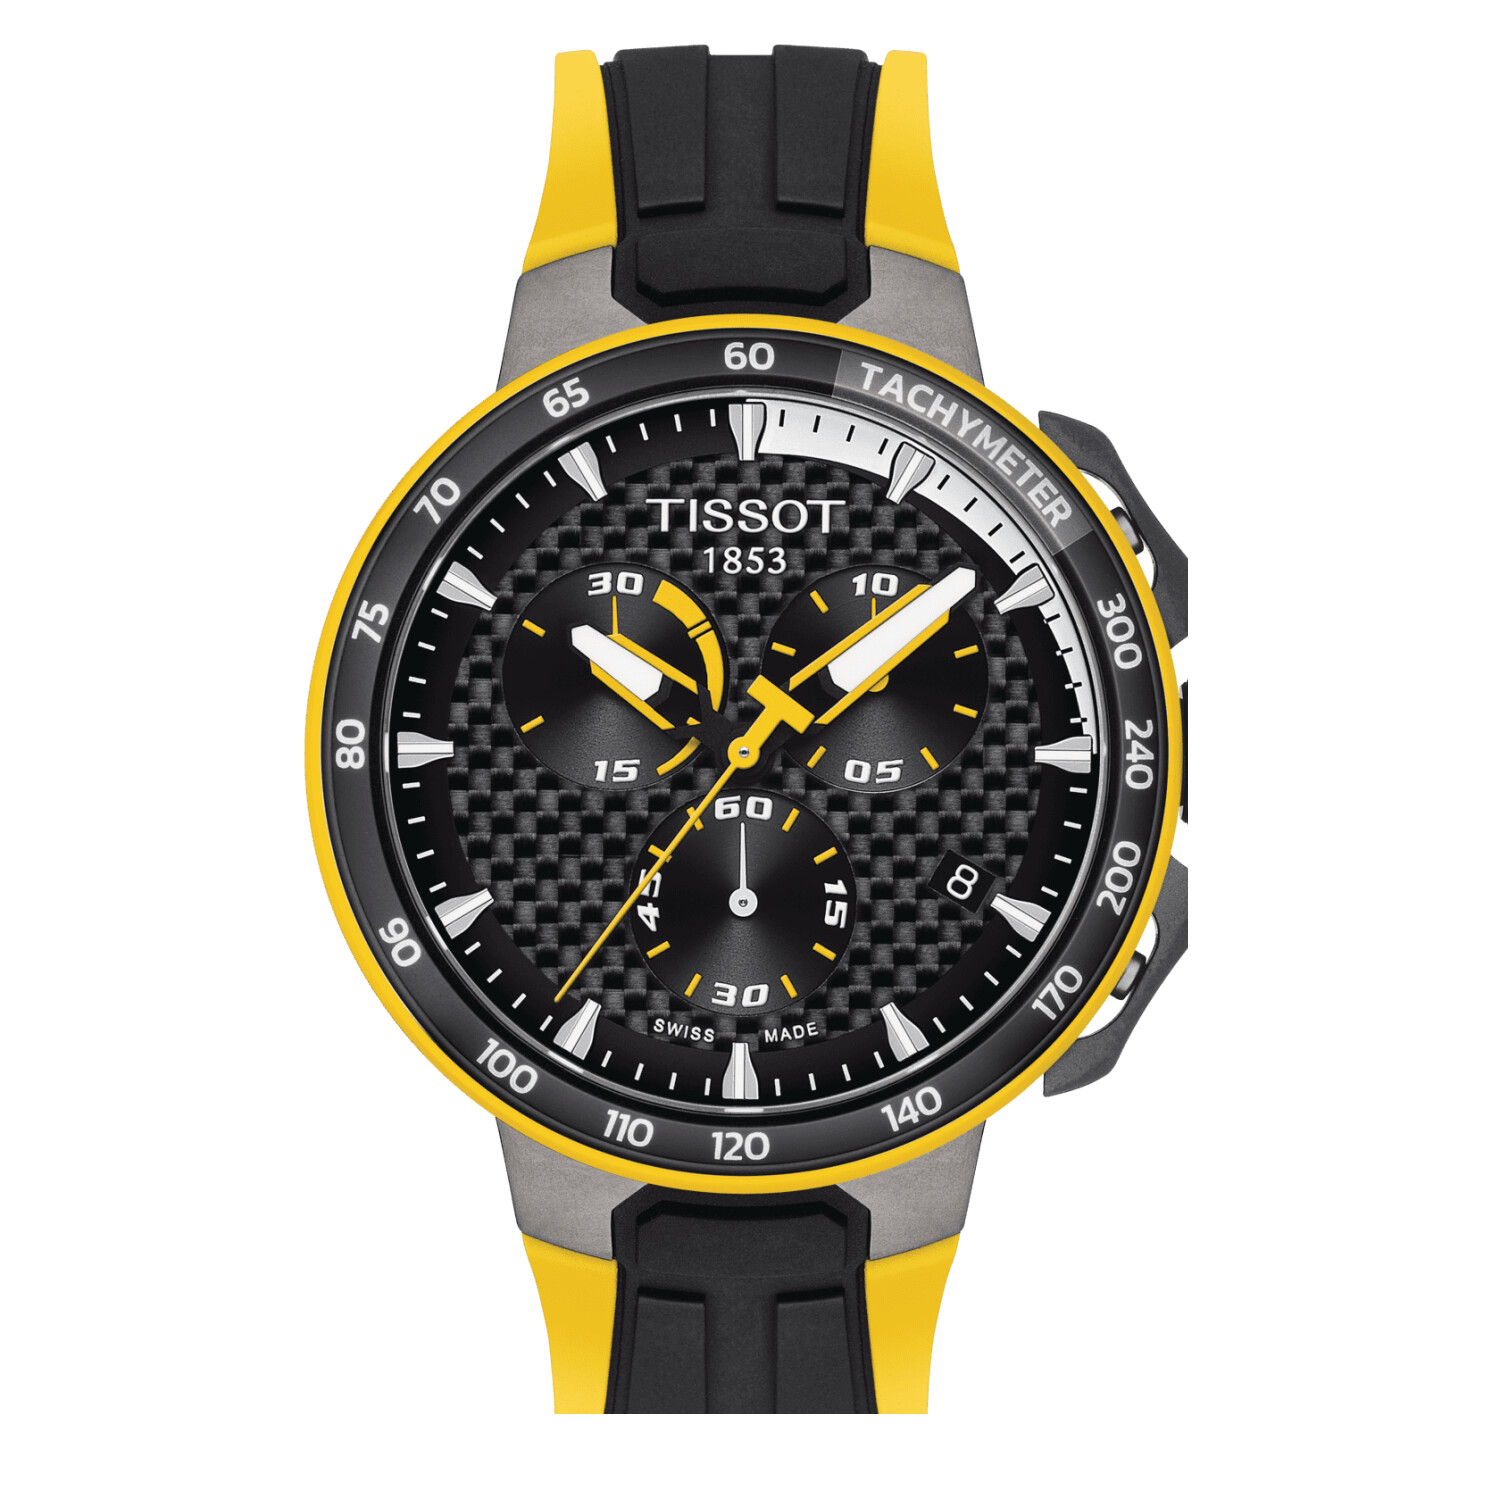 Buy Tissot T Race Cycling Tour De France 2020 Watch T111 417 37 201 00 From £430 00 Today